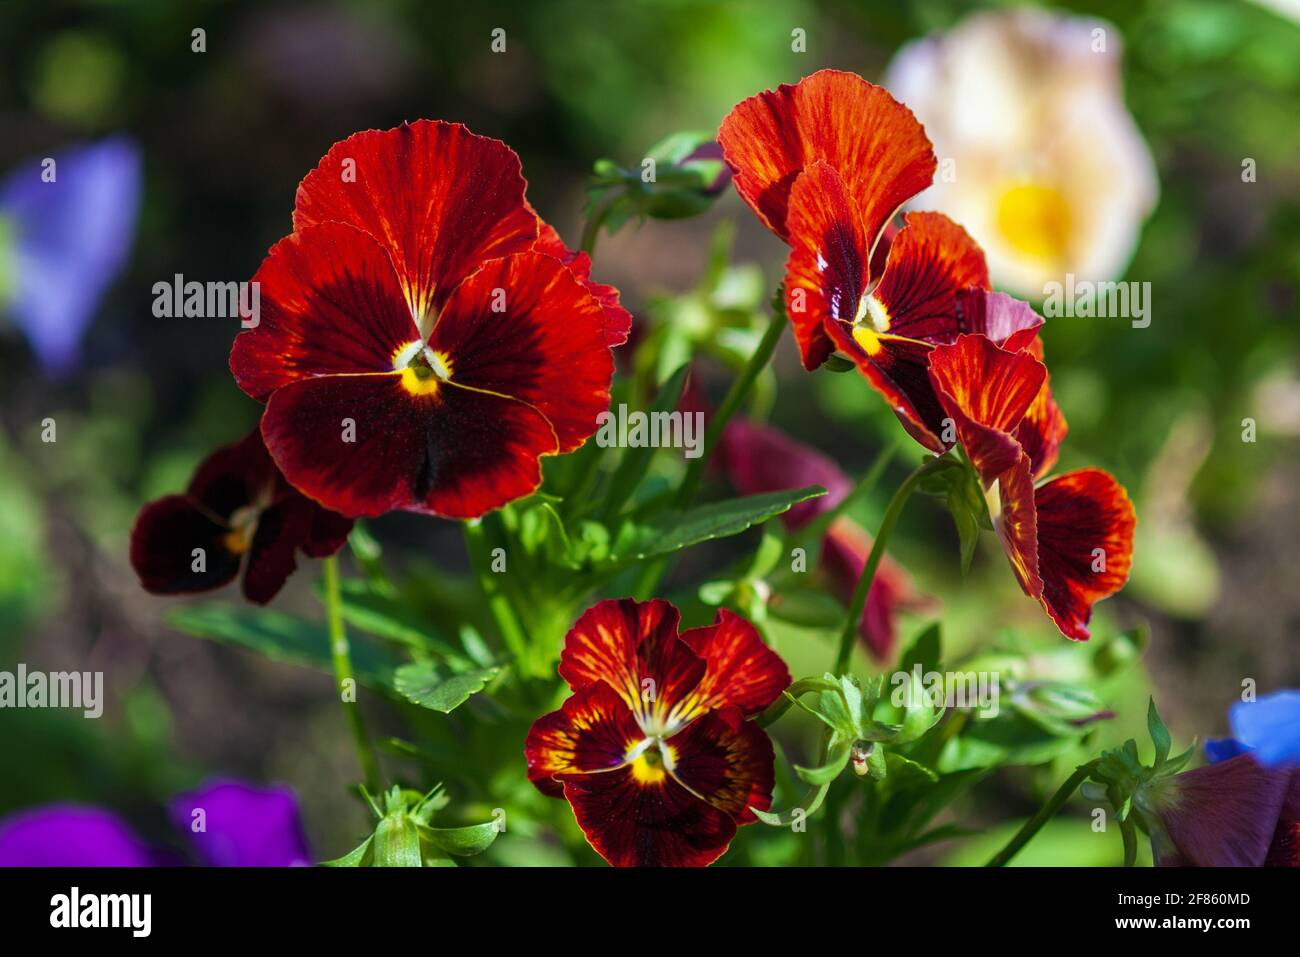 Red pansies flowering on a flower bed in summer Stock Photo